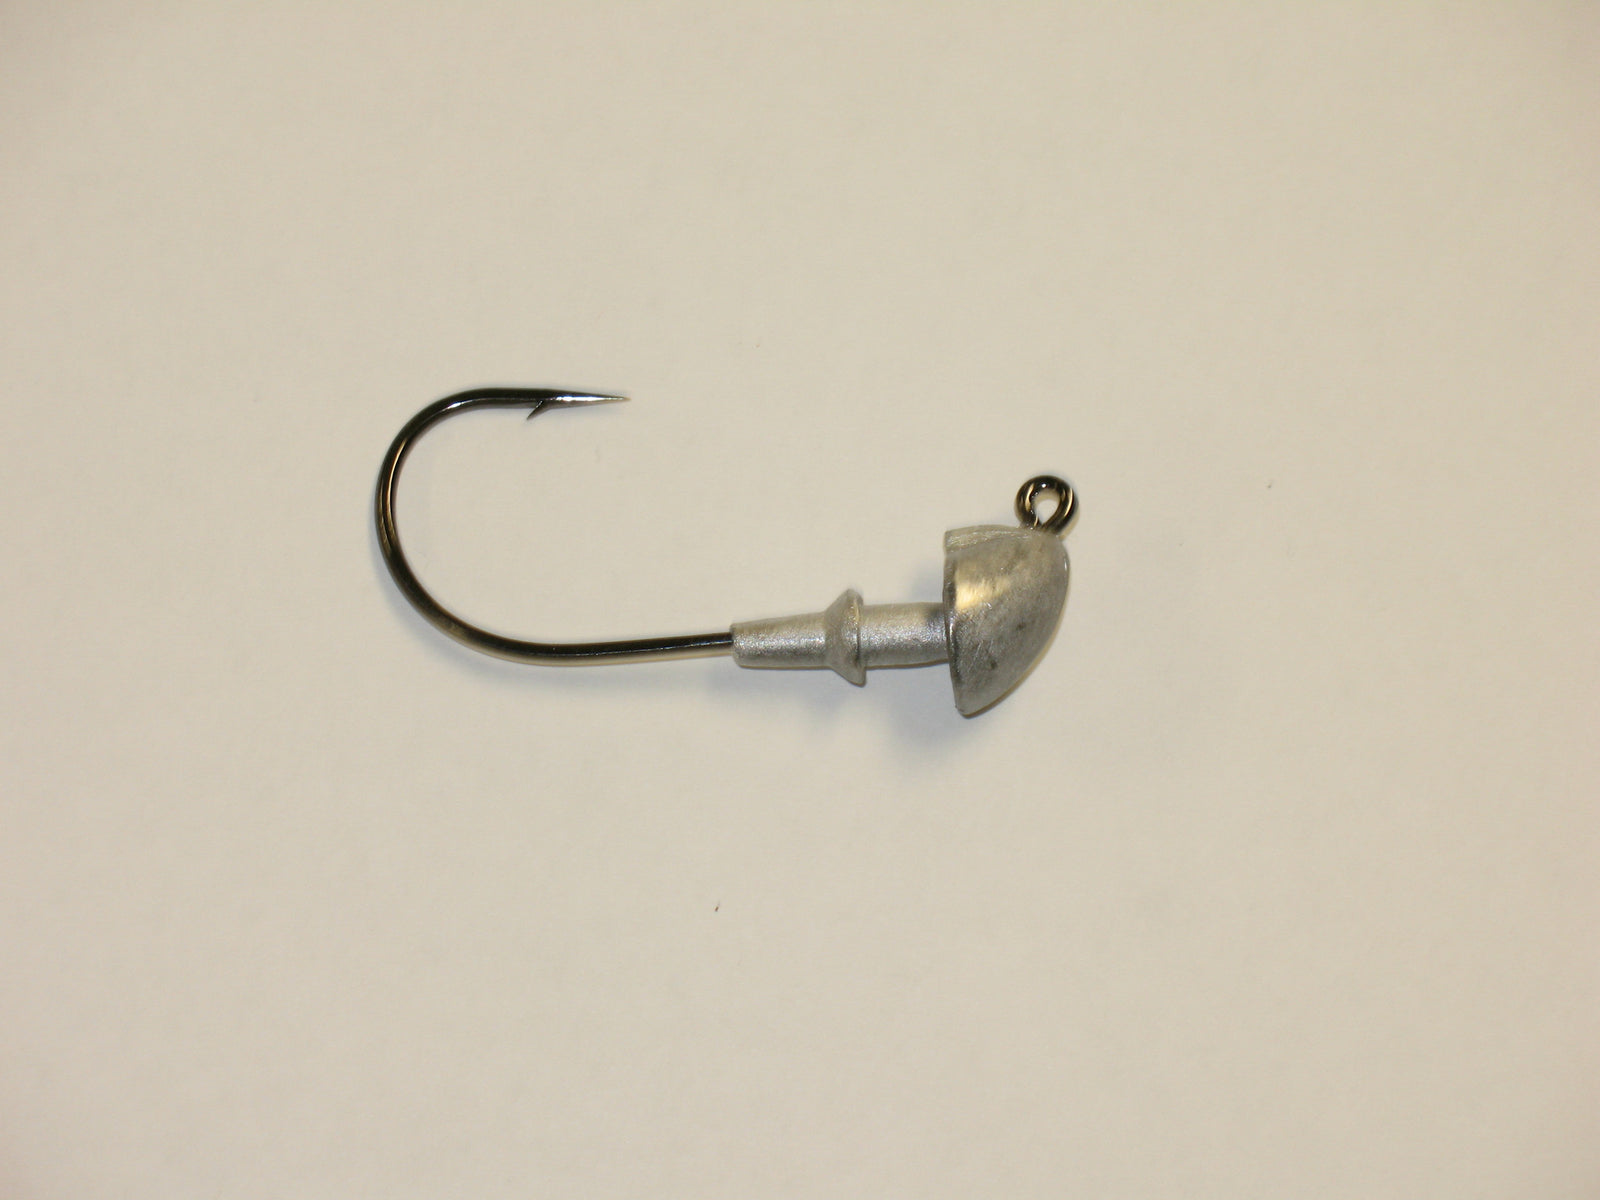 Terminal Tackle - Angler's Headquarters